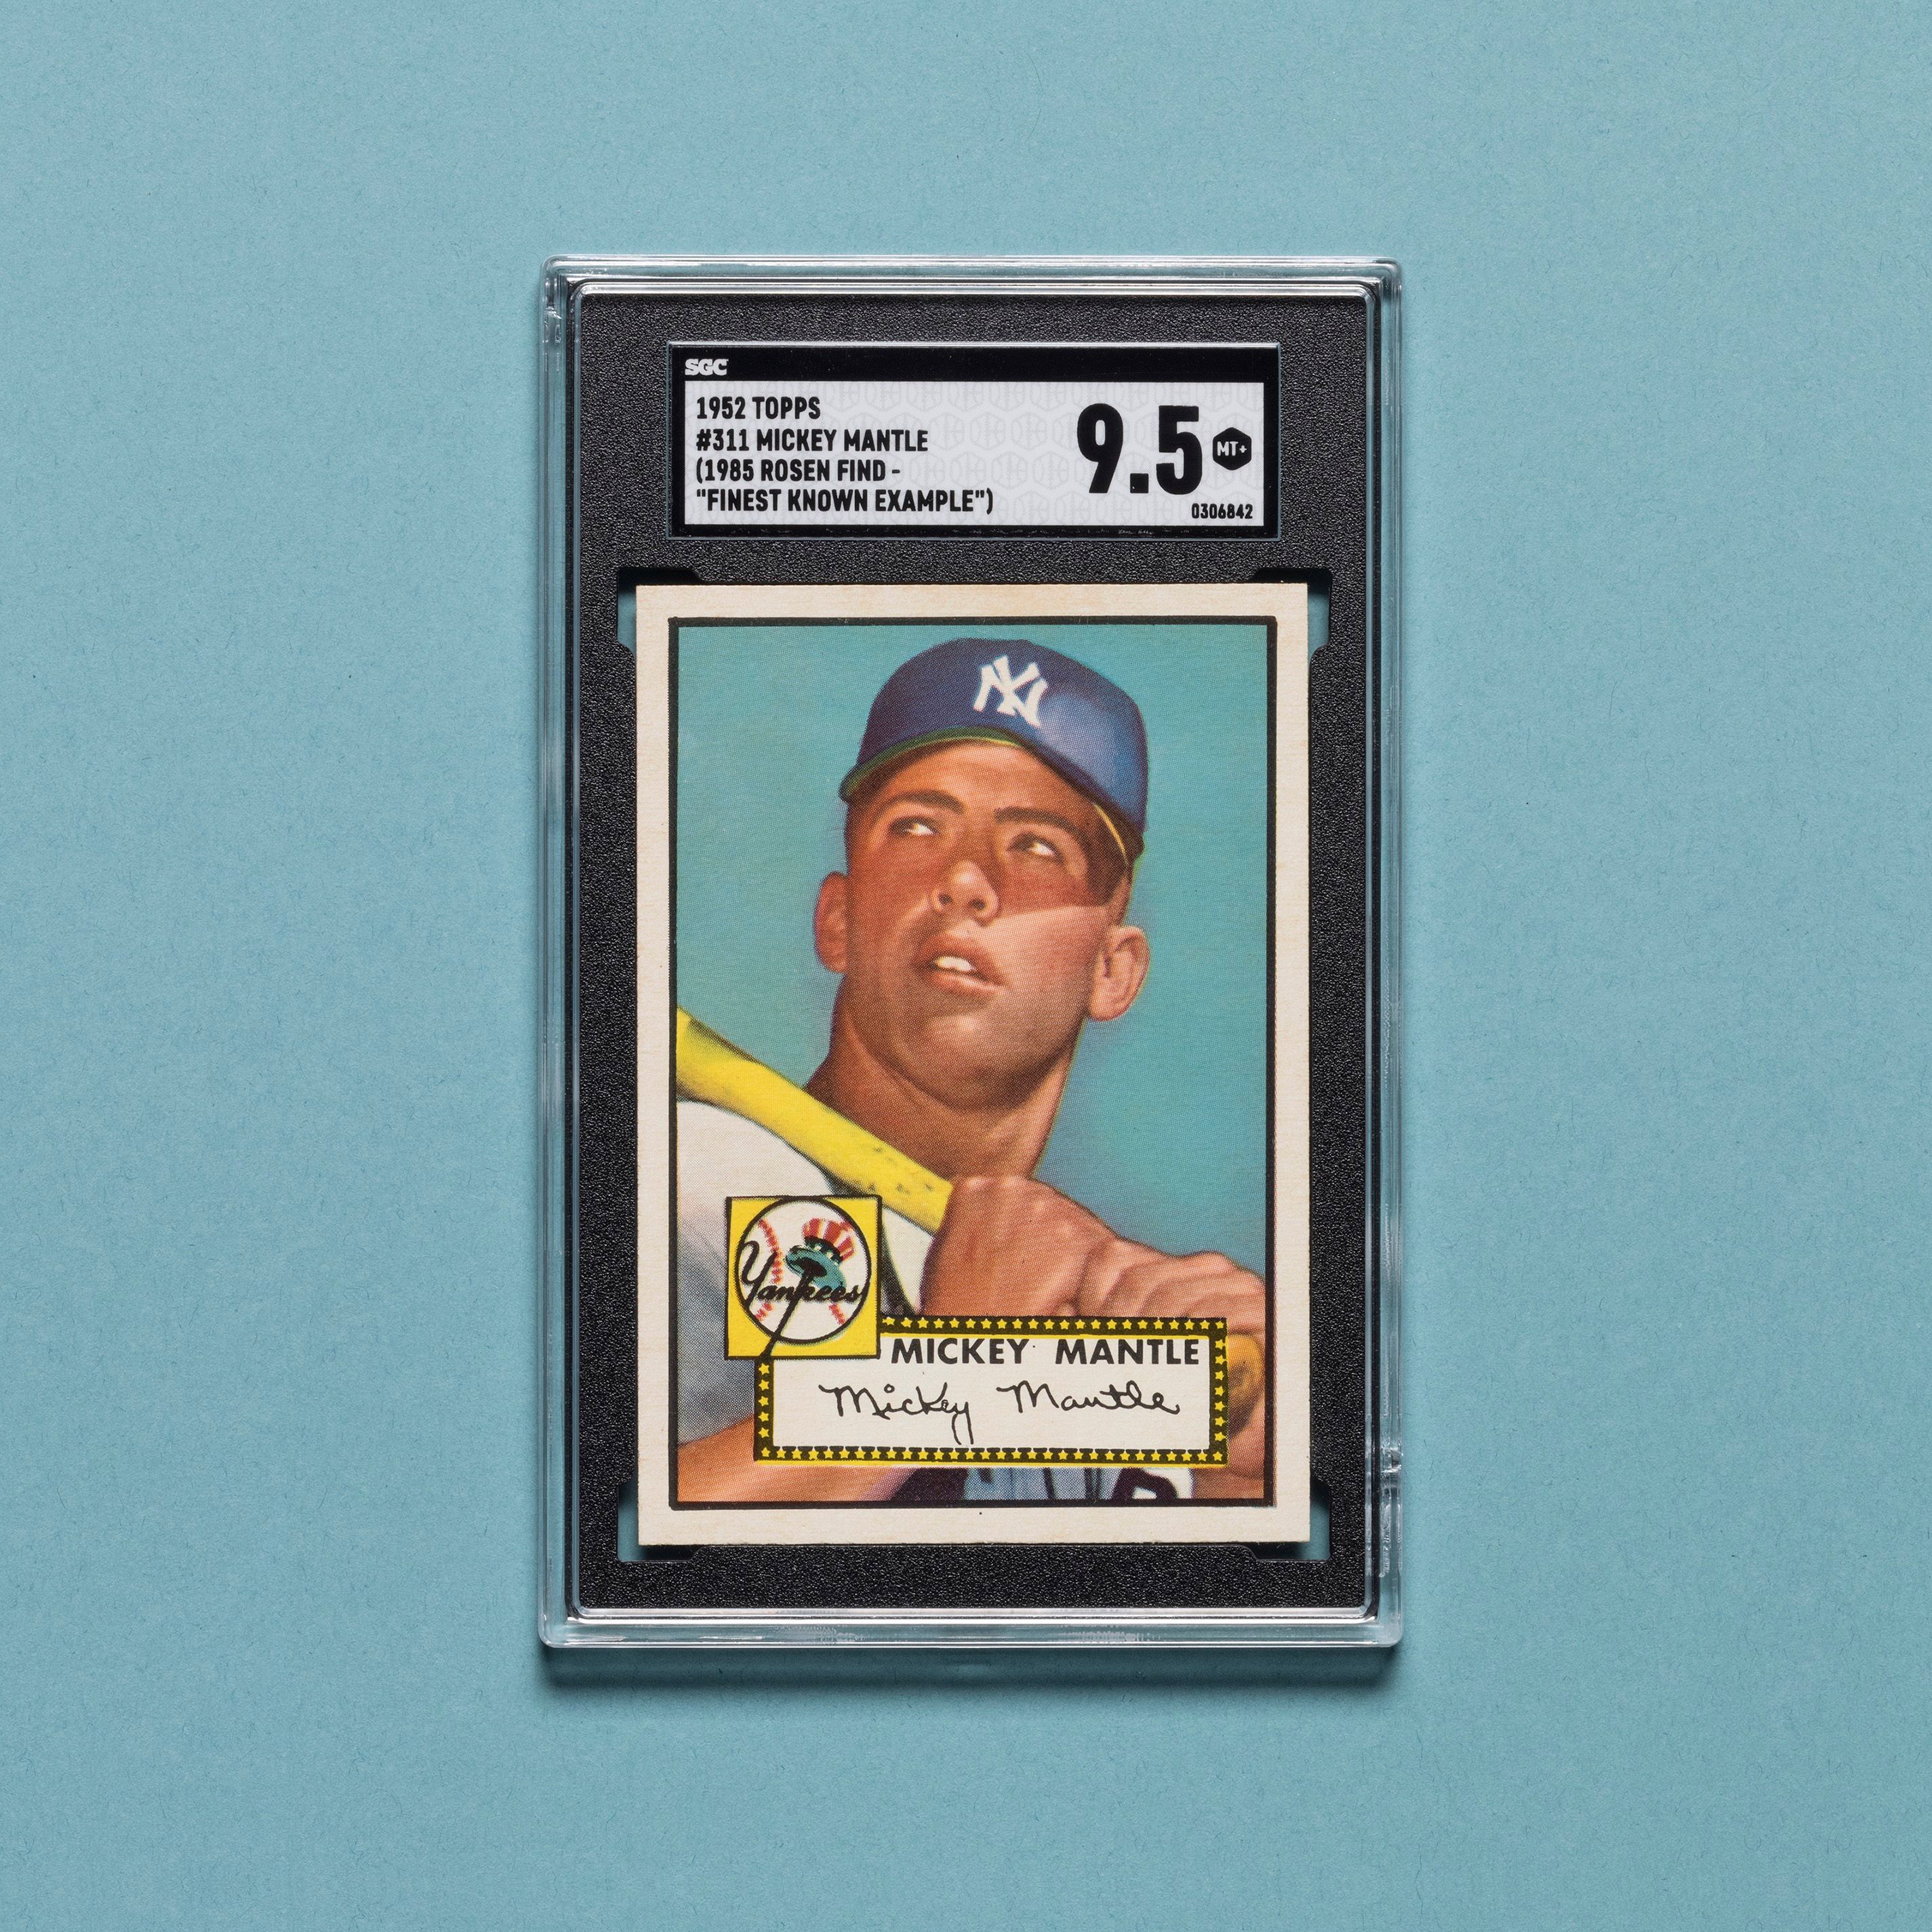 Derek Grady, executive vice president of sports auctions for Heritage Auctions, said, ‘The quality of the card is the key. Four sharp corners, the gloss and the color jumps off the card.’ Image courtesy of Heritage Auctions, HA.com